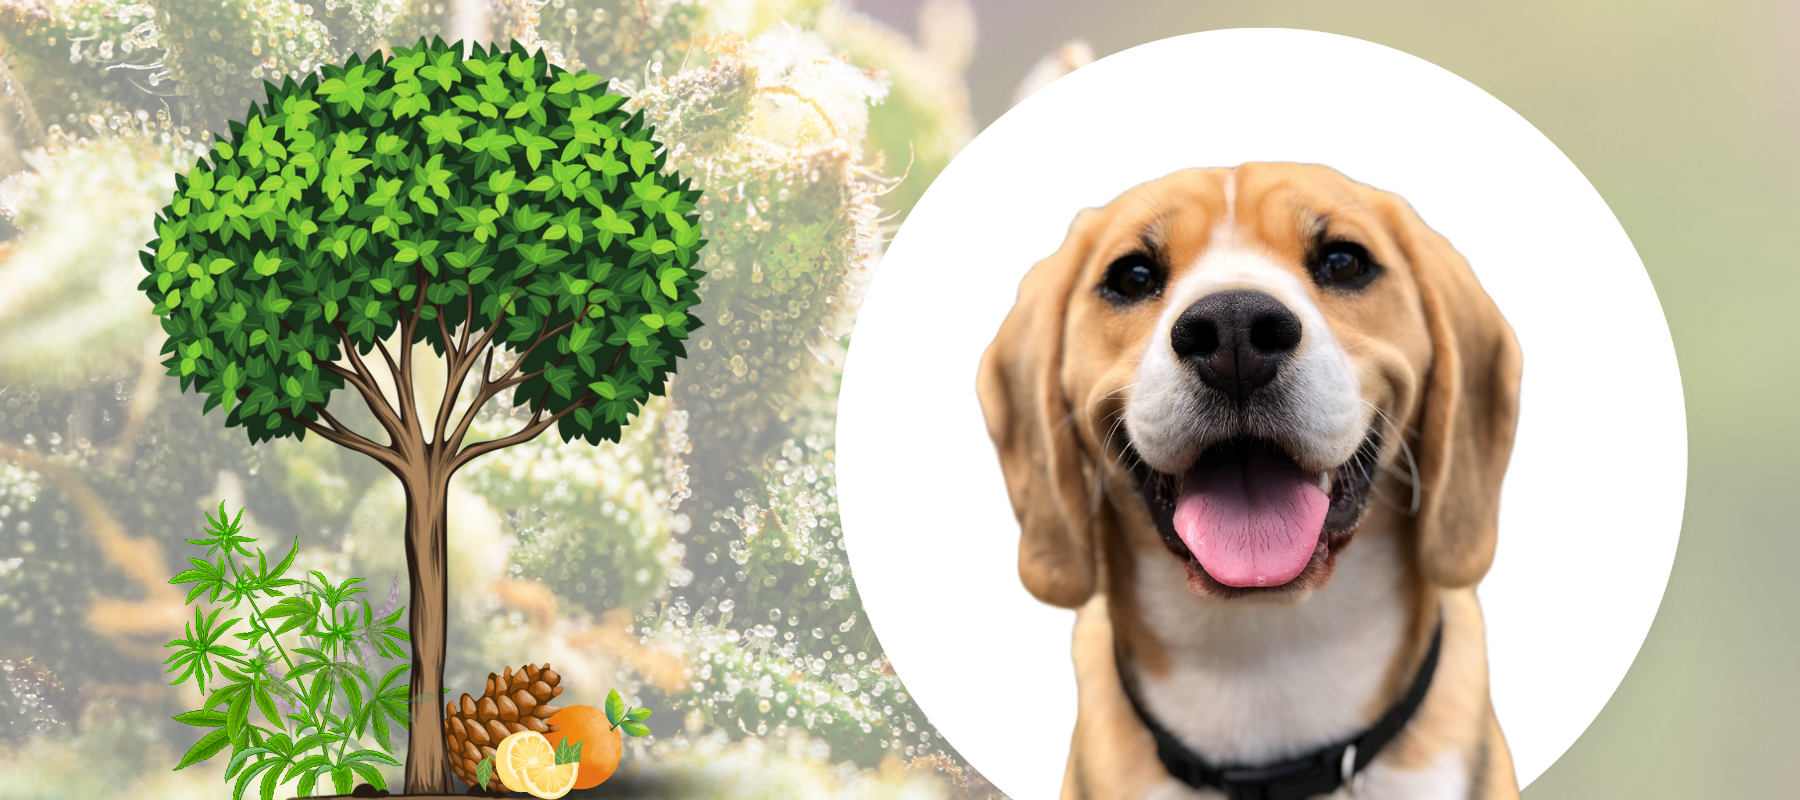 Dog smiling next a tree in front of other common plants that produce terpenes